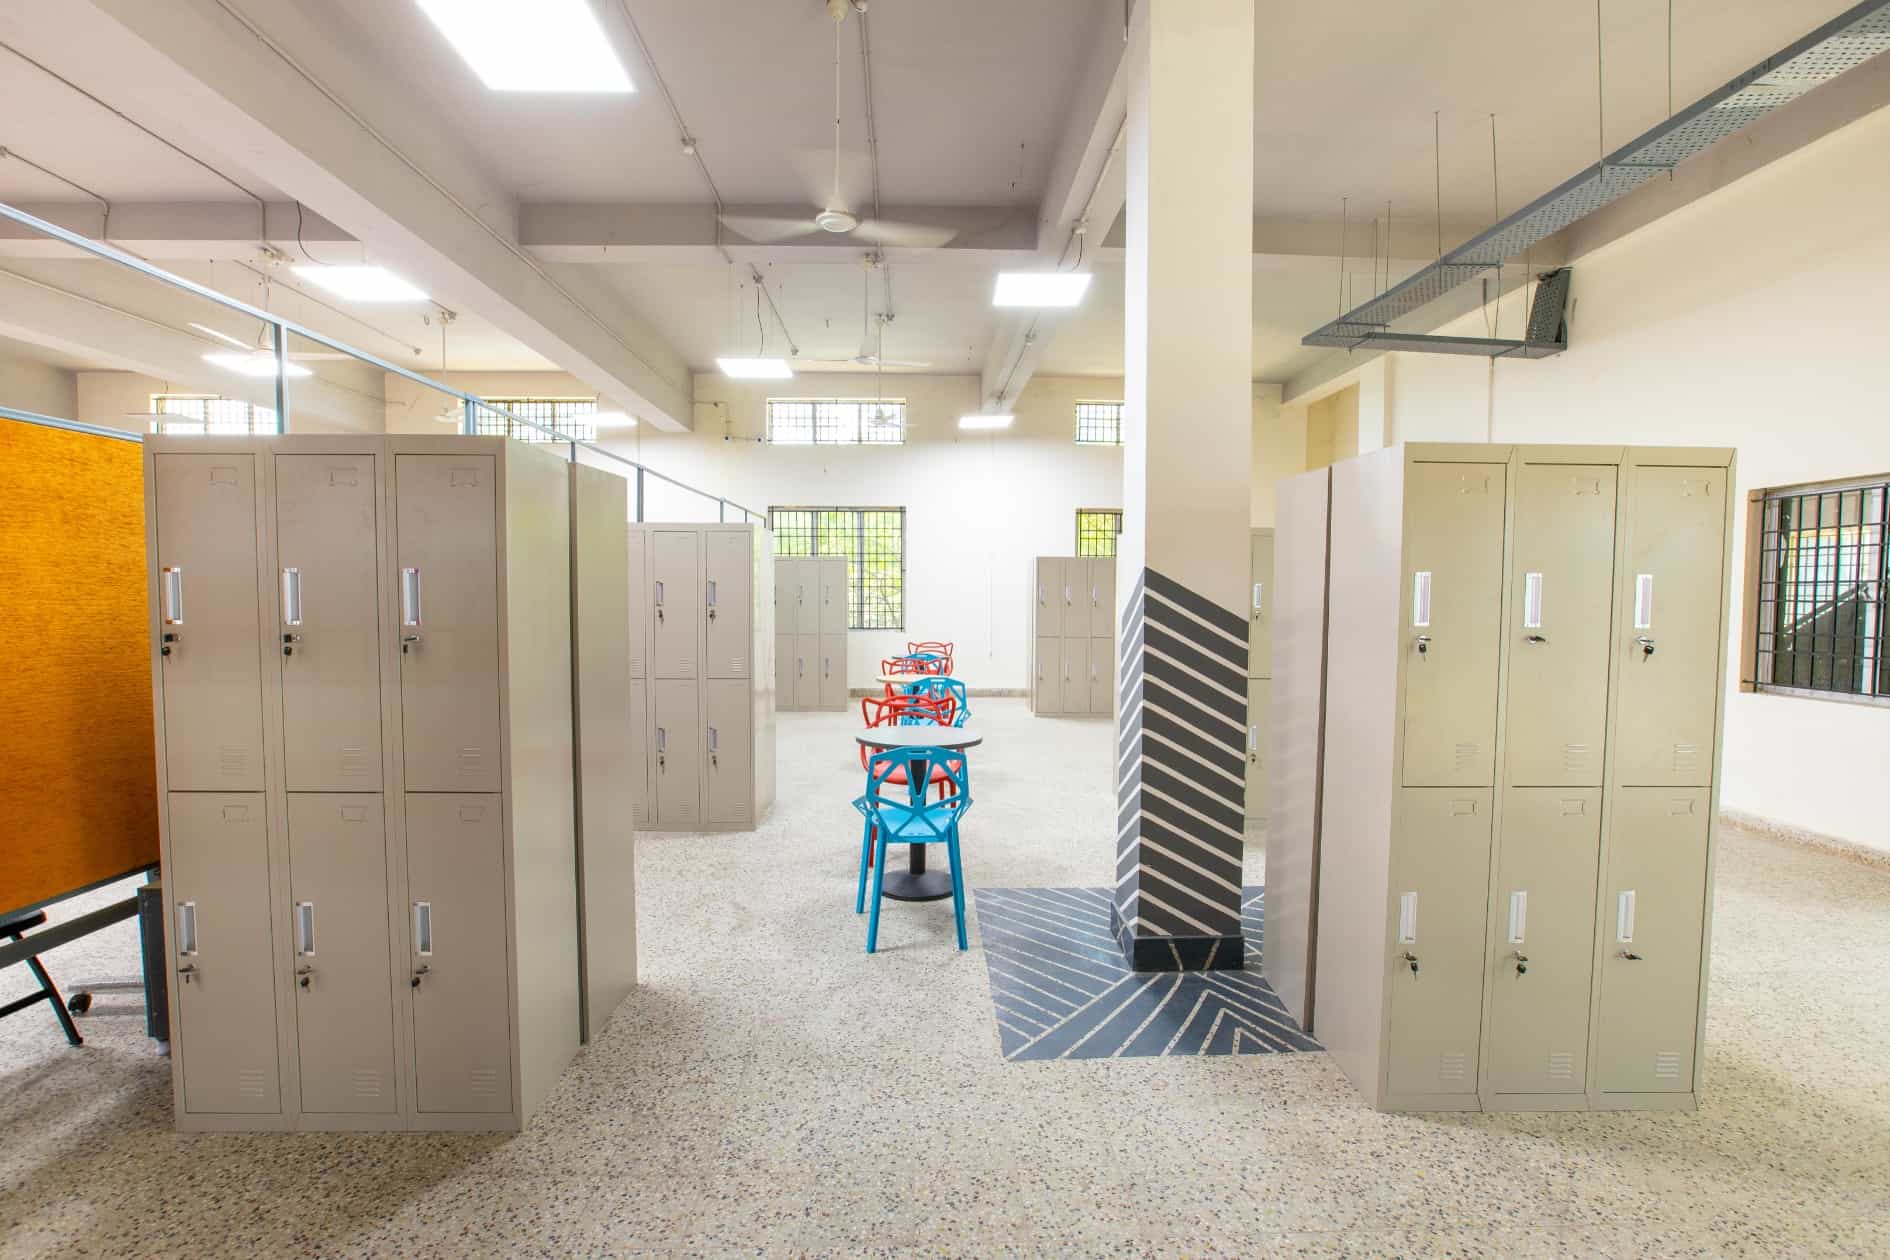 Personal locker facility available at a design college in Chennai for its students use